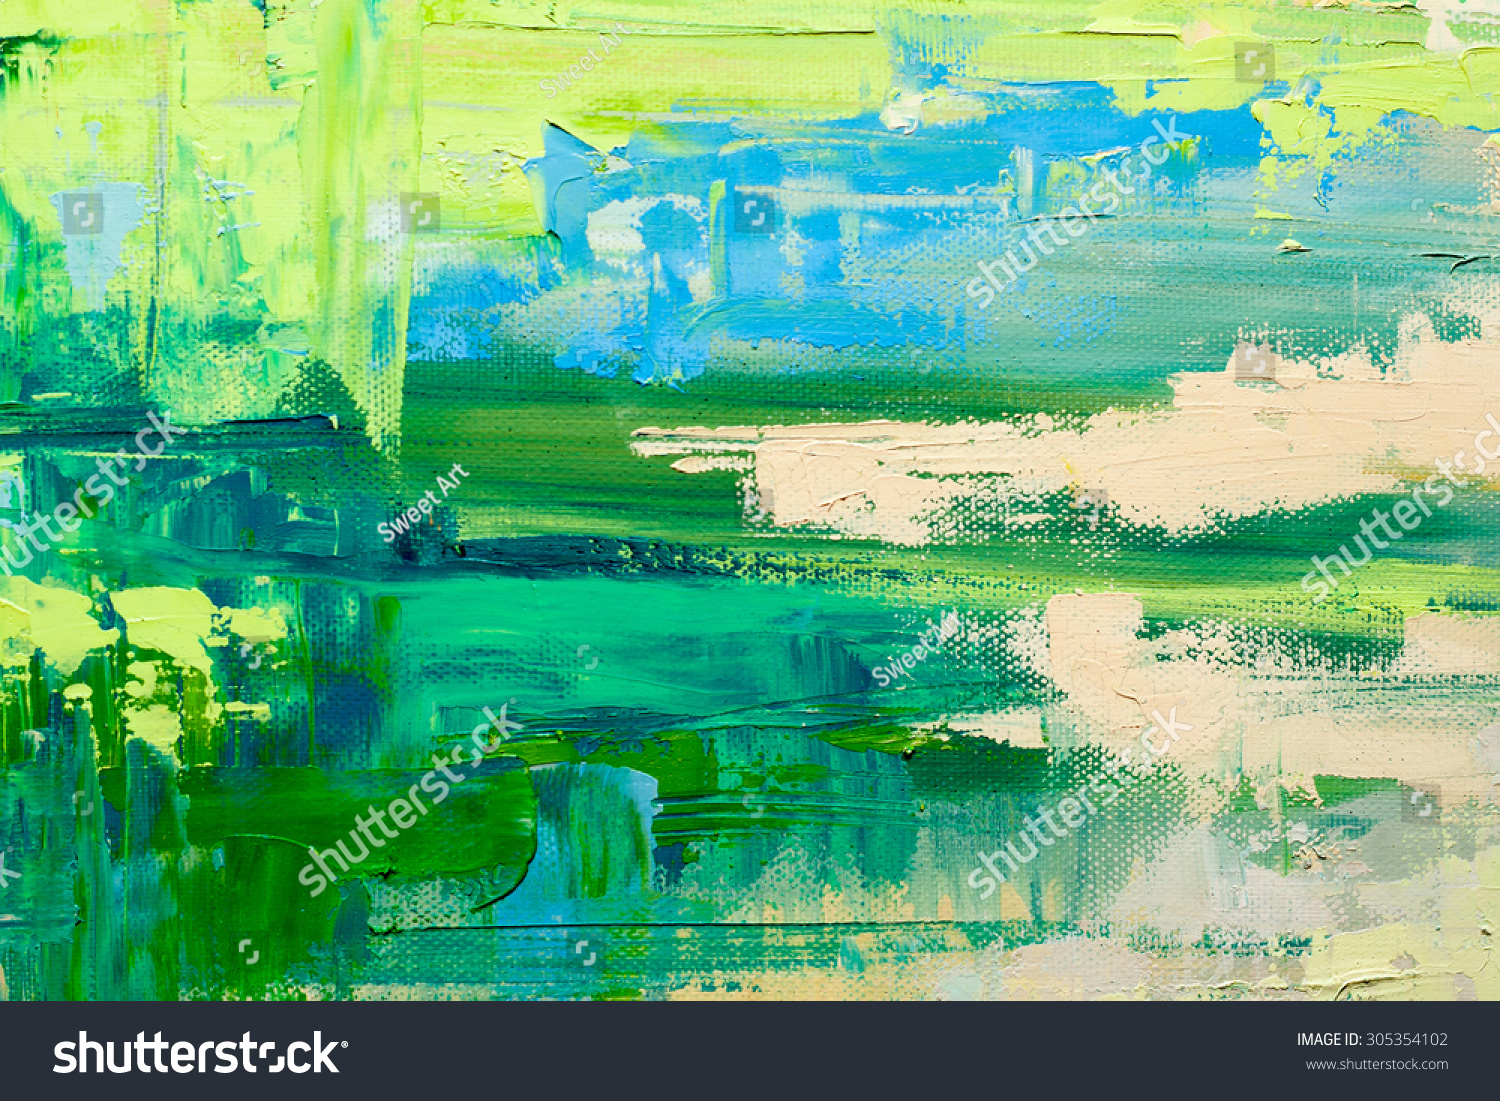 Abstract Art Background Oil Painting On Stock Illustration 305354102 ...